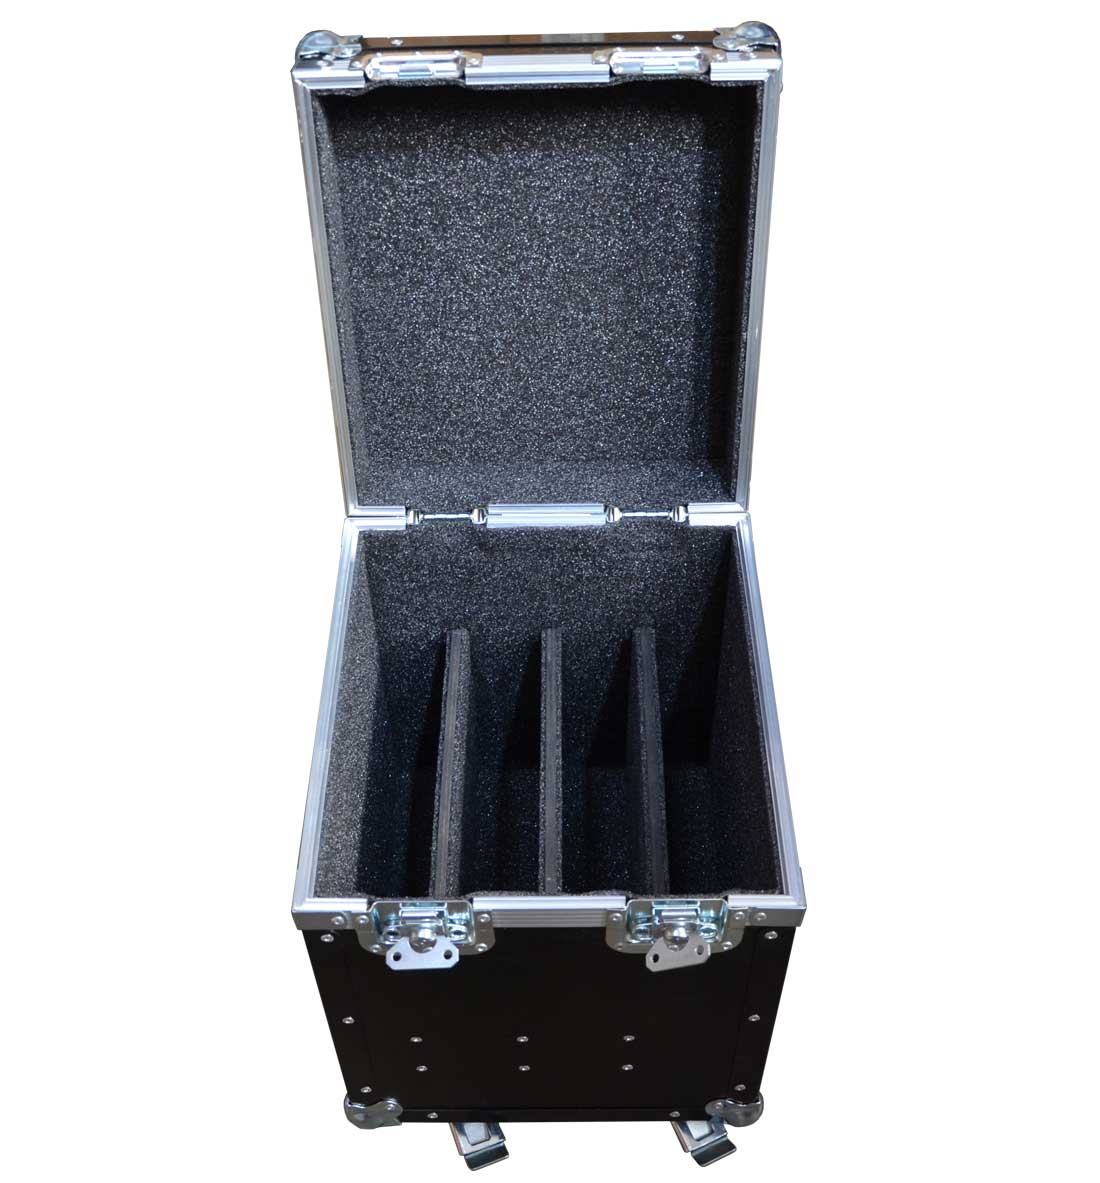 STR Scales Flight Roll Carry Case - Store Pads & Control Box